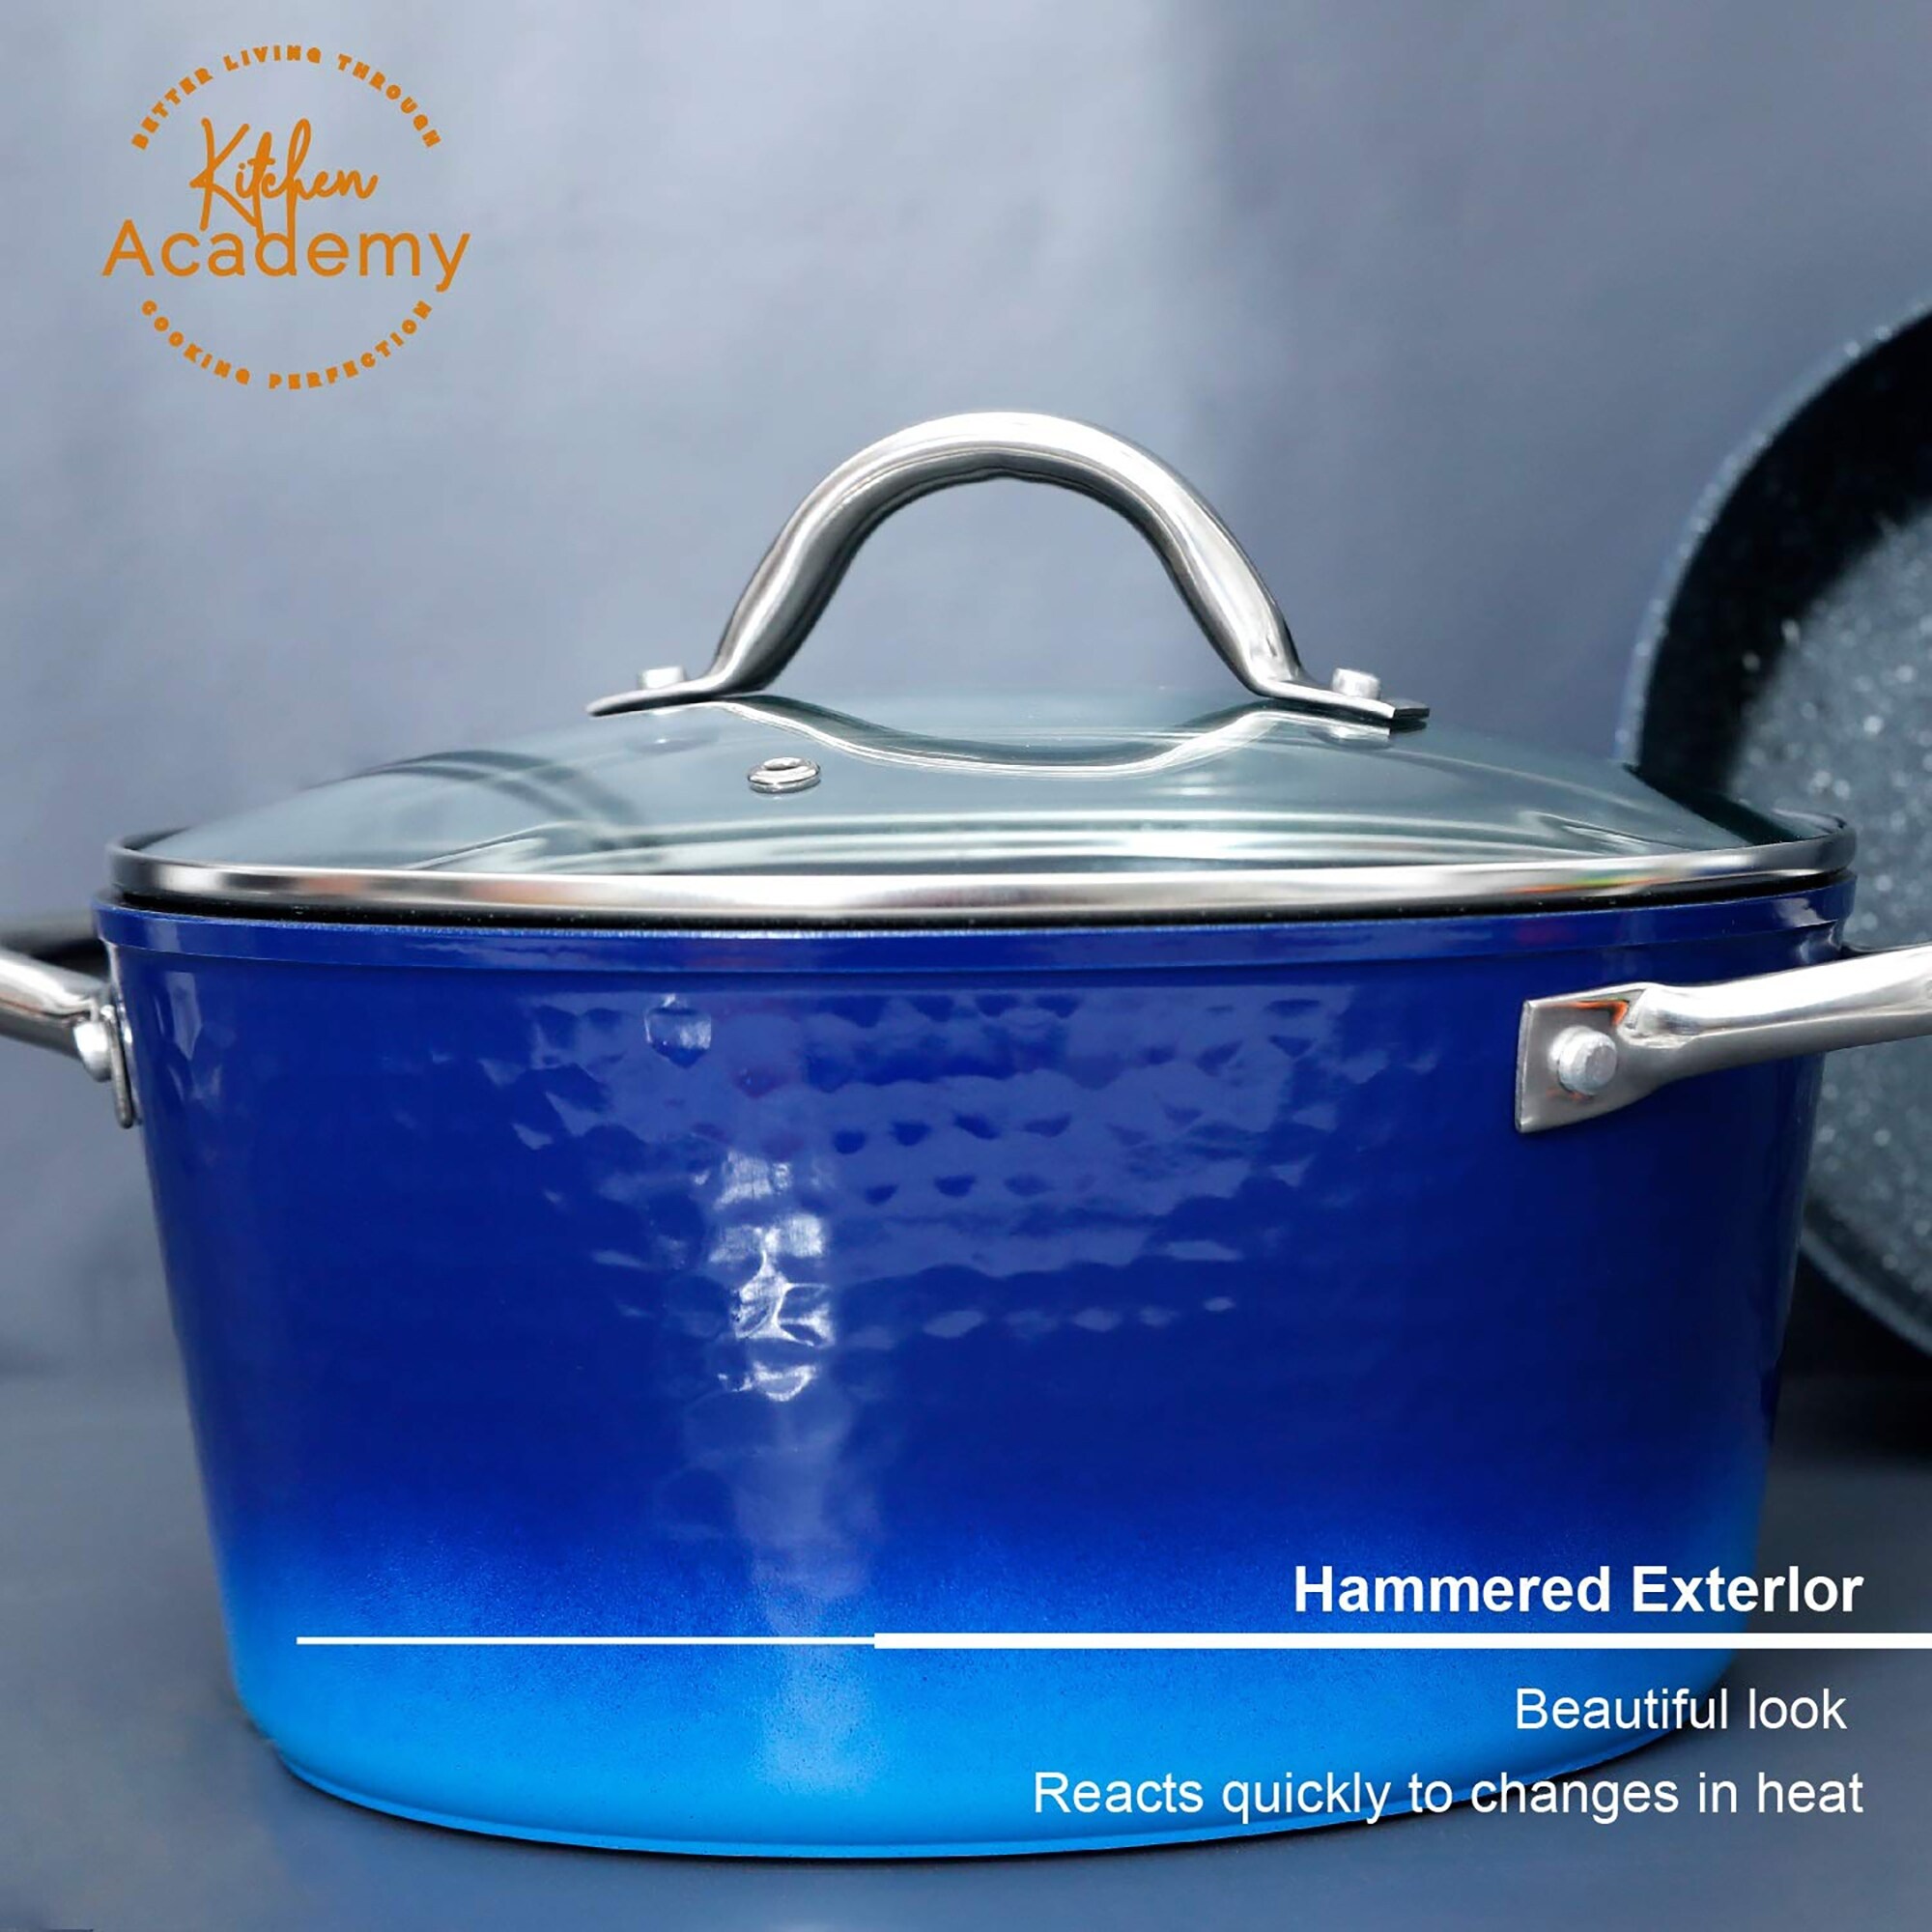 https://ak1.ostkcdn.com/images/products/is/images/direct/d045e263952132fbeb2ec93b7691723e060418df/Kitchen-Academy-Nonstick-Granite-Coated-12-15-piece-Cookware-Set.jpg